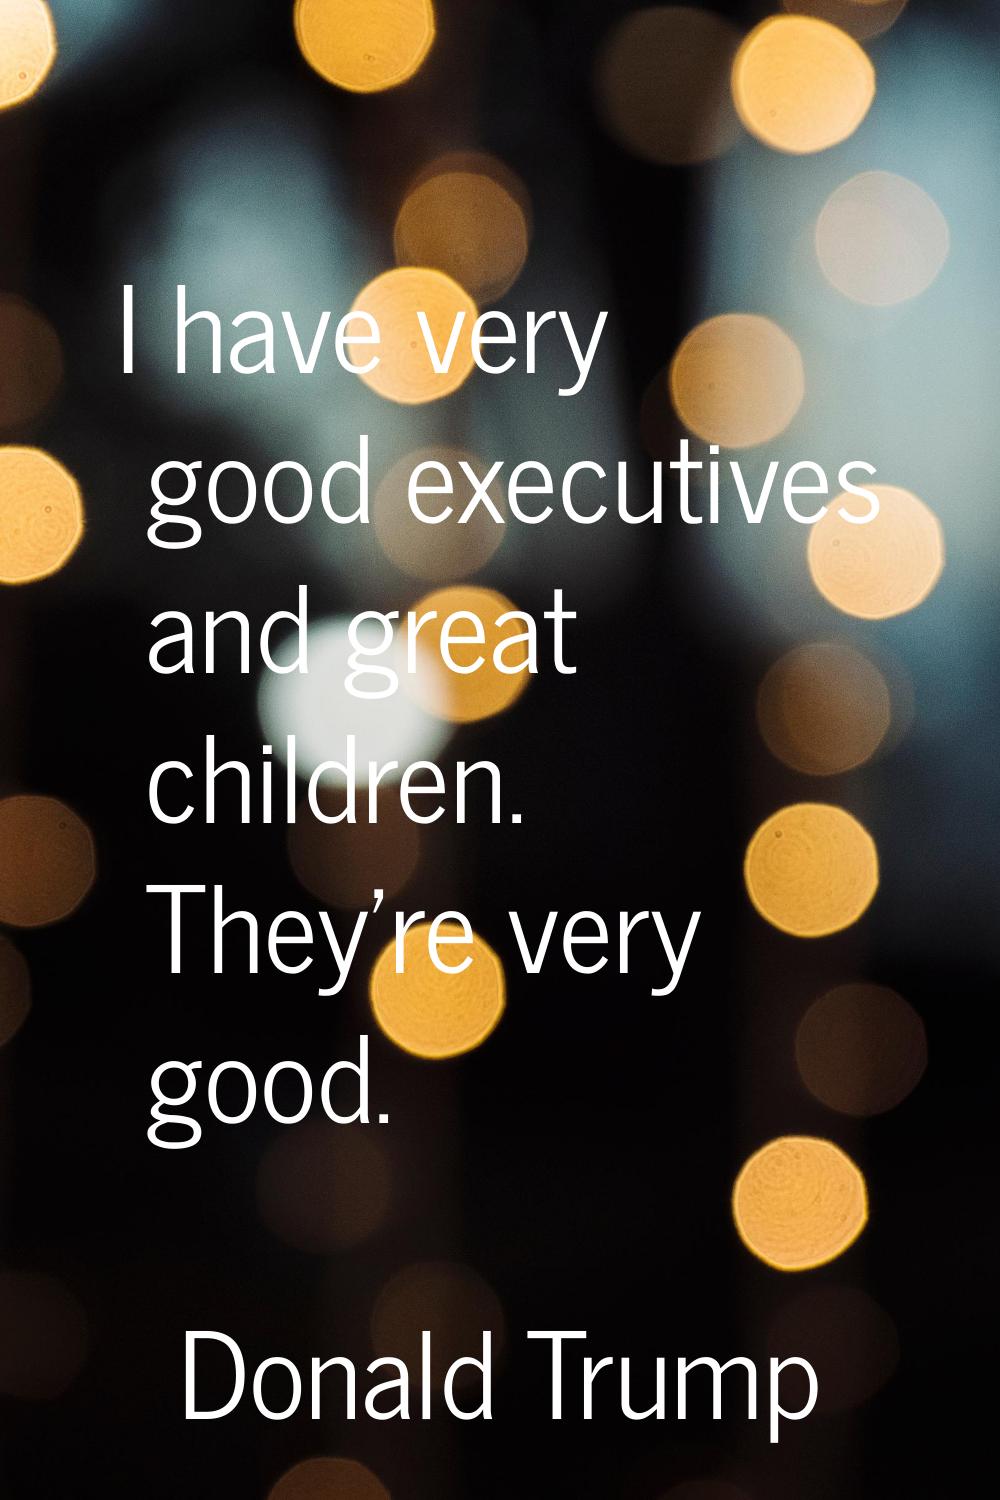 I have very good executives and great children. They're very good.